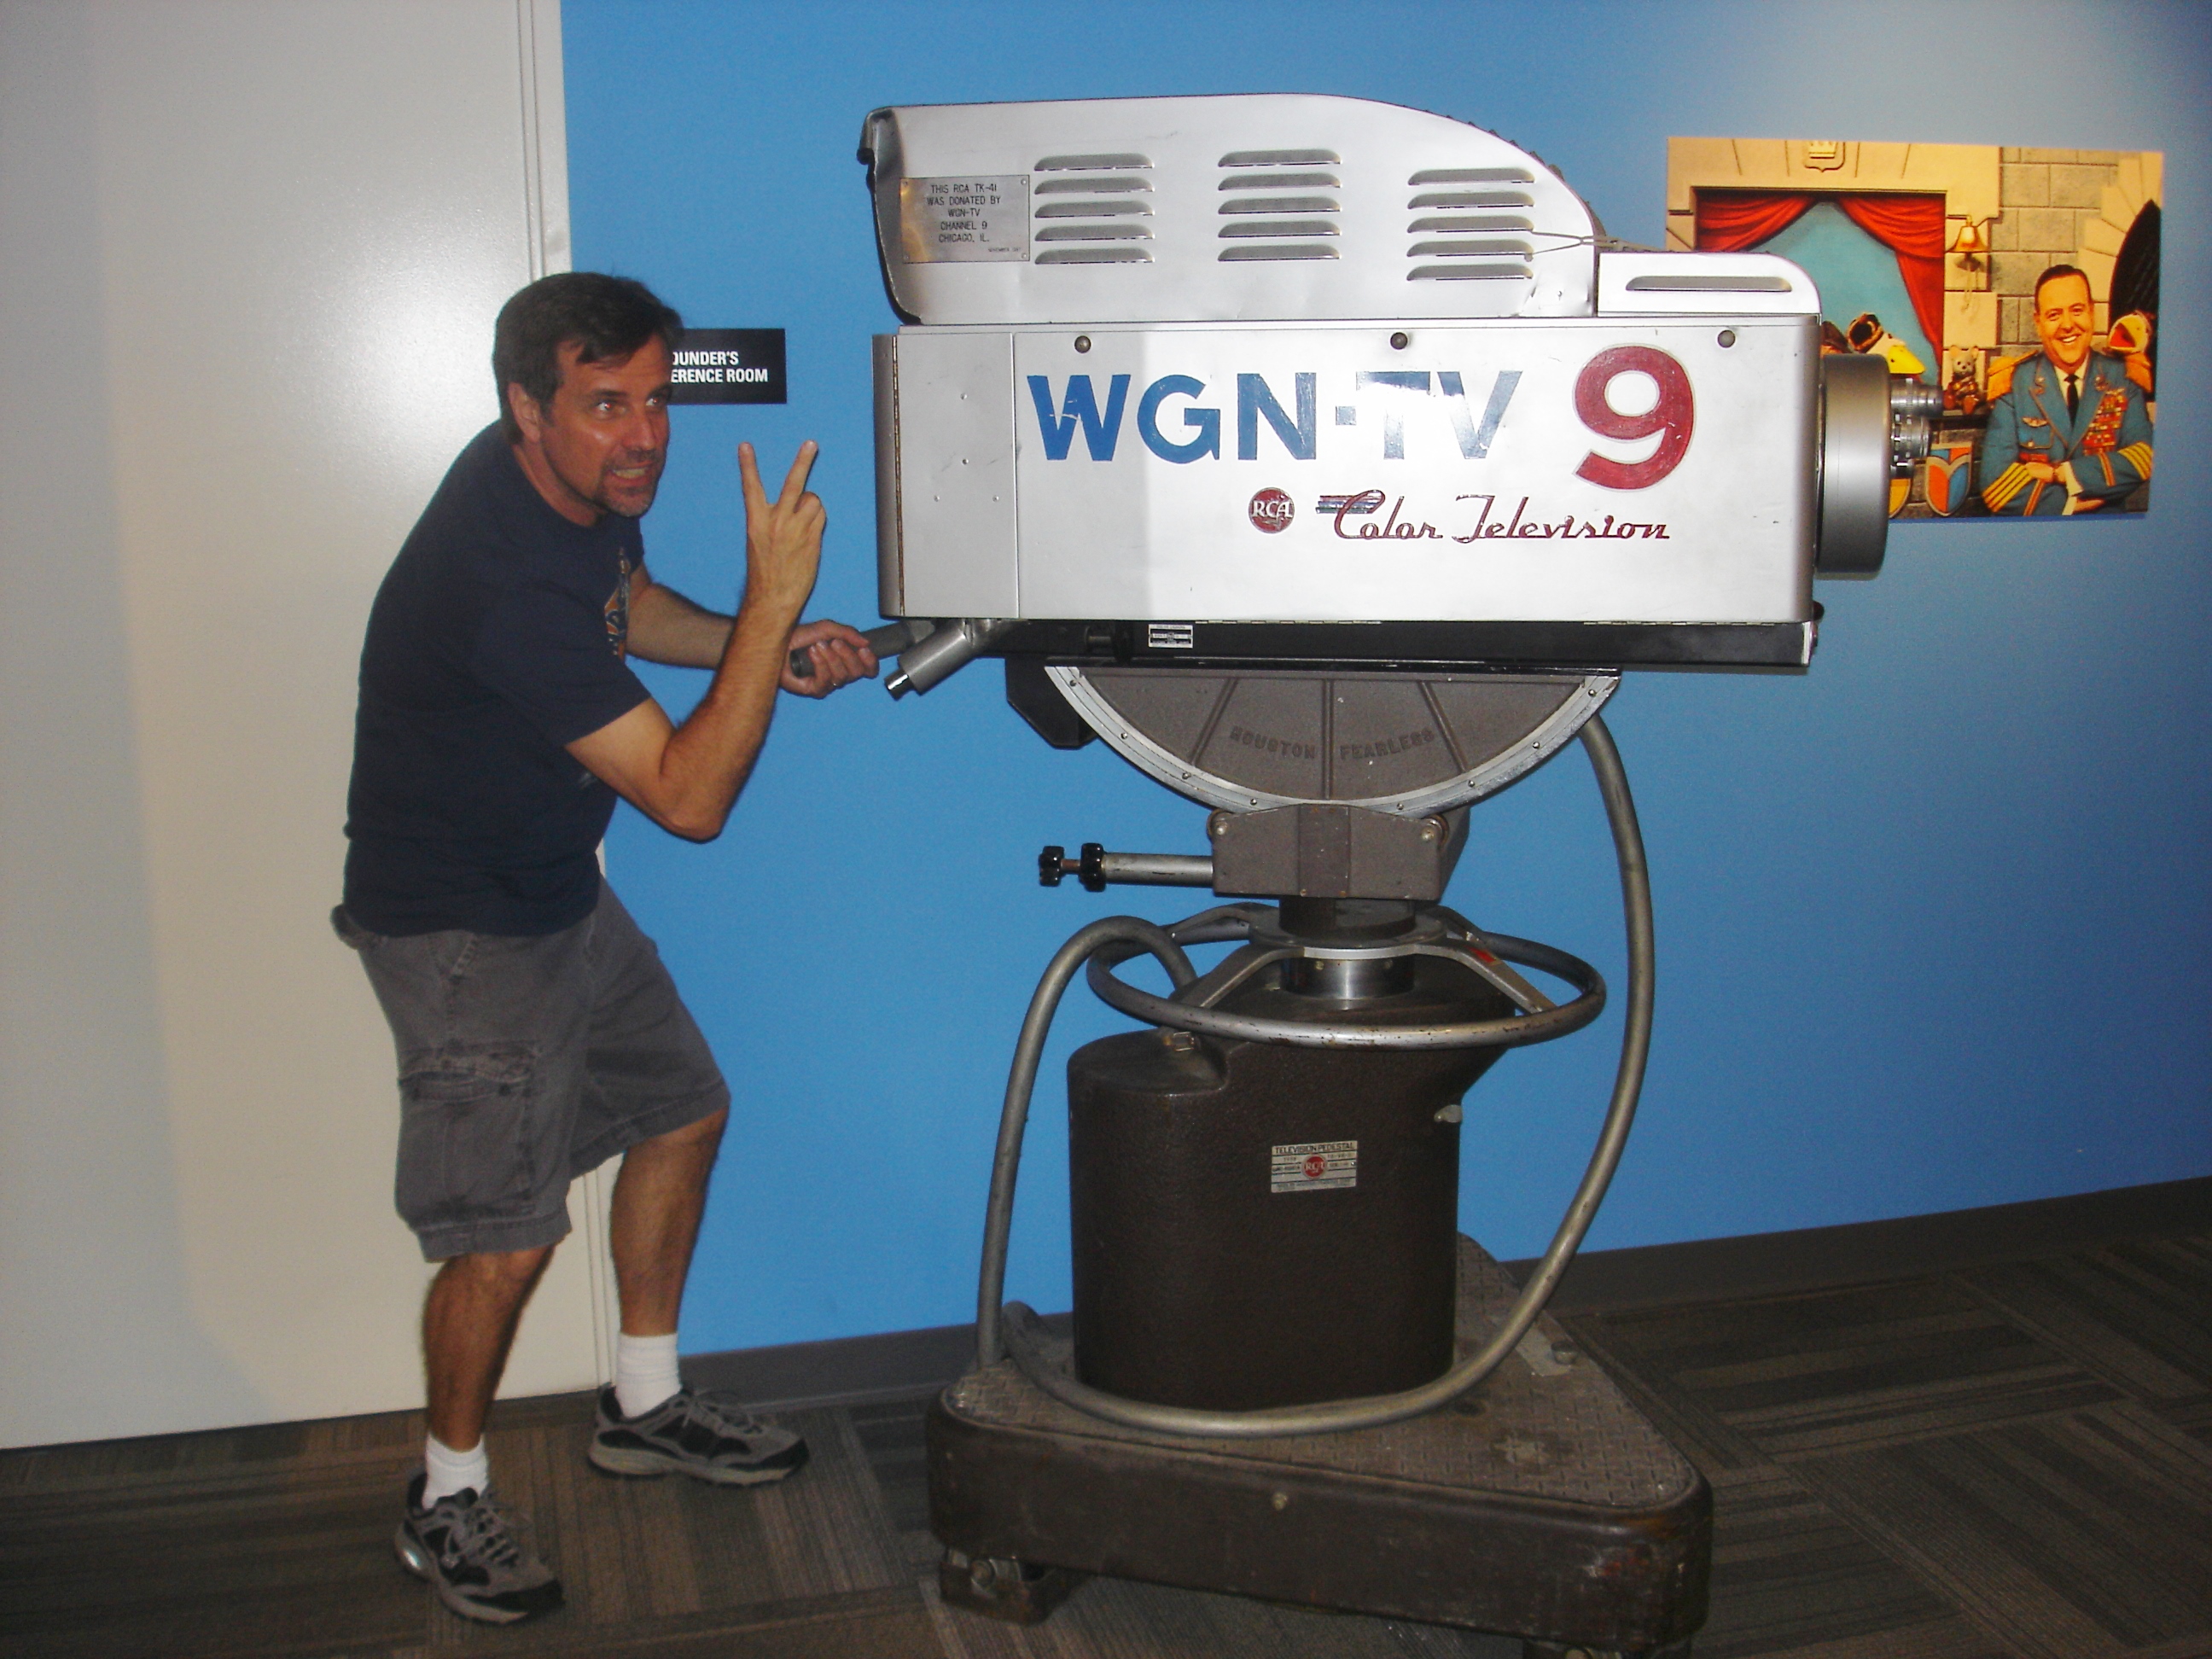 Scott goofs around at The Museum of Broadcast Communications in Chicago August 2014